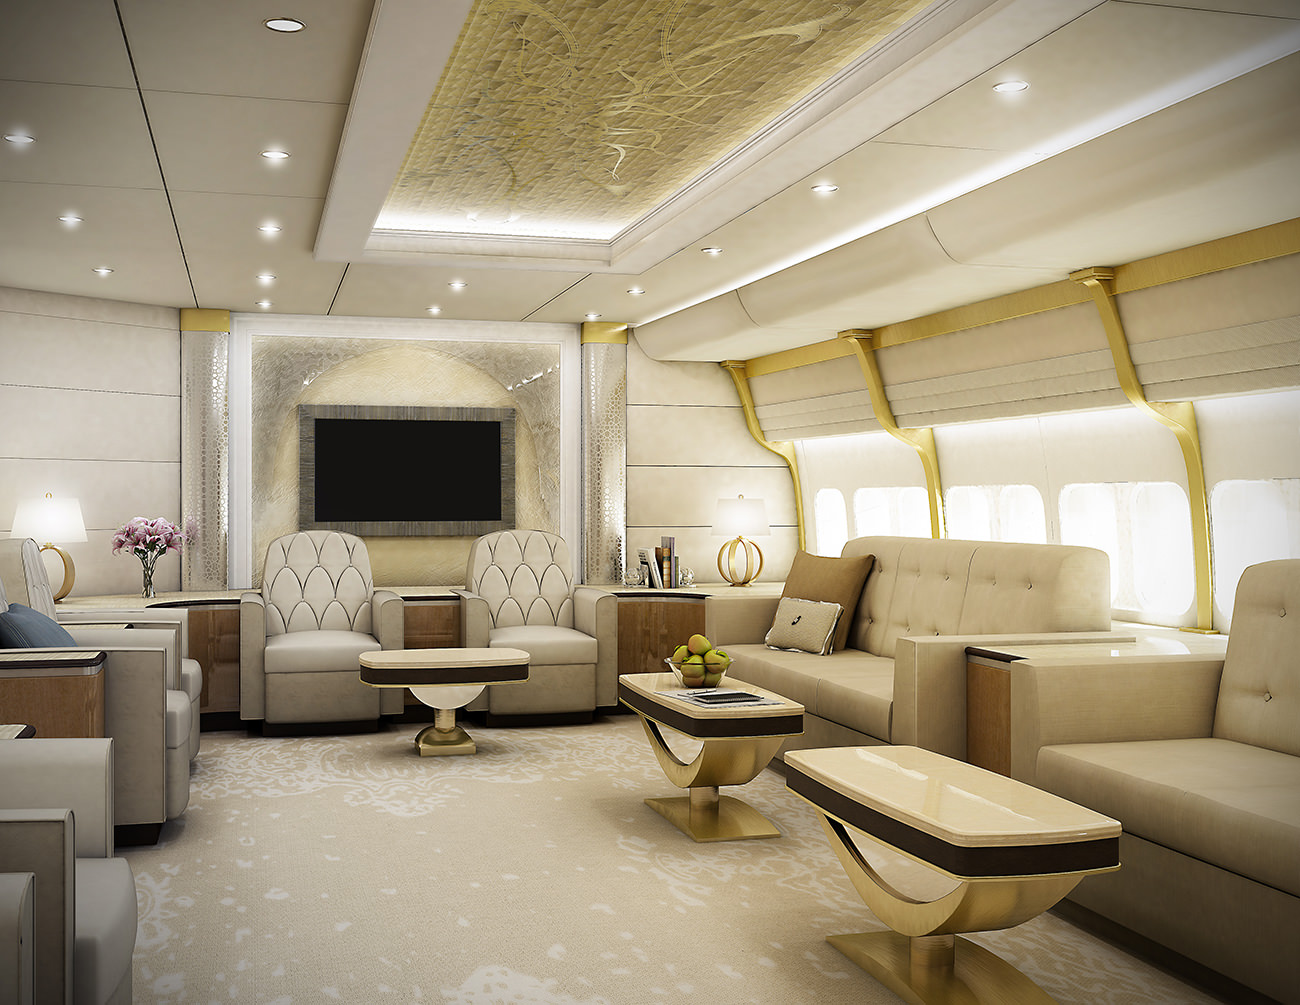 The 747 8 Vip The Superyacht Of The Skies